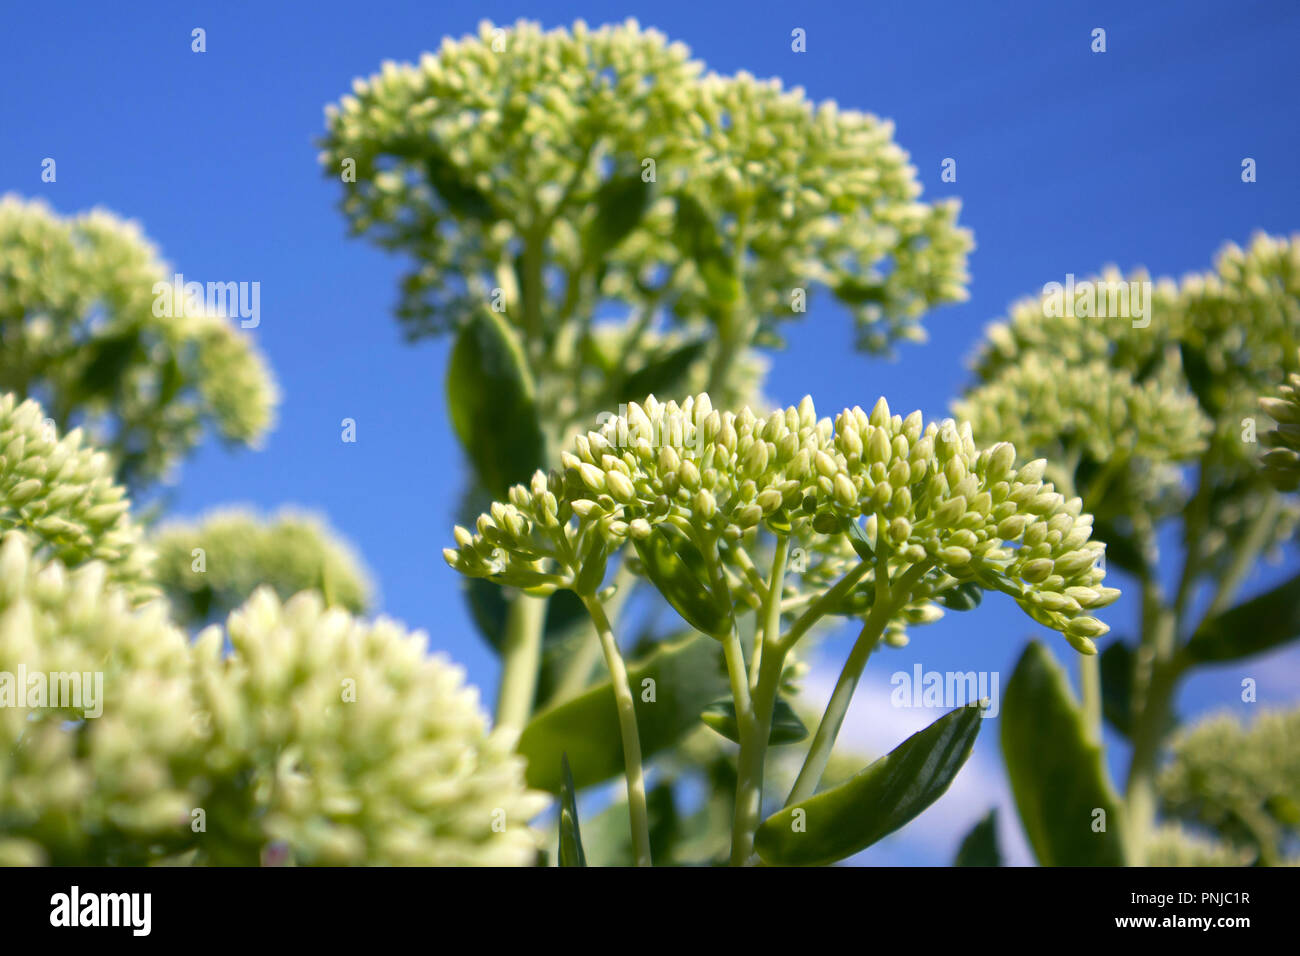 Young green growing bush of Sedum with bunches of buds against bright blue sky Stock Photo